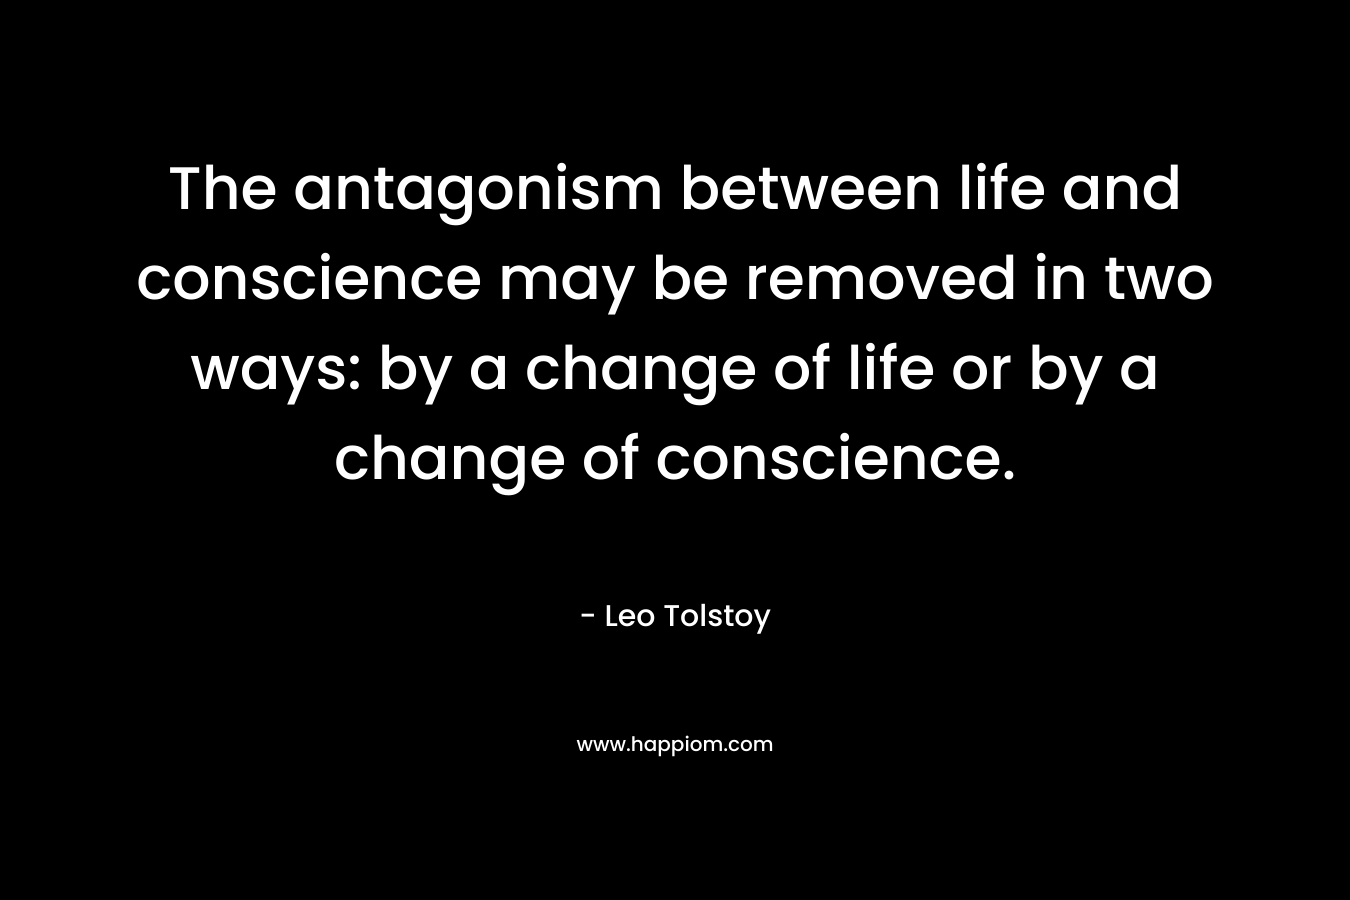 The antagonism between life and conscience may be removed in two ways: by a change of life or by a change of conscience. – Leo Tolstoy